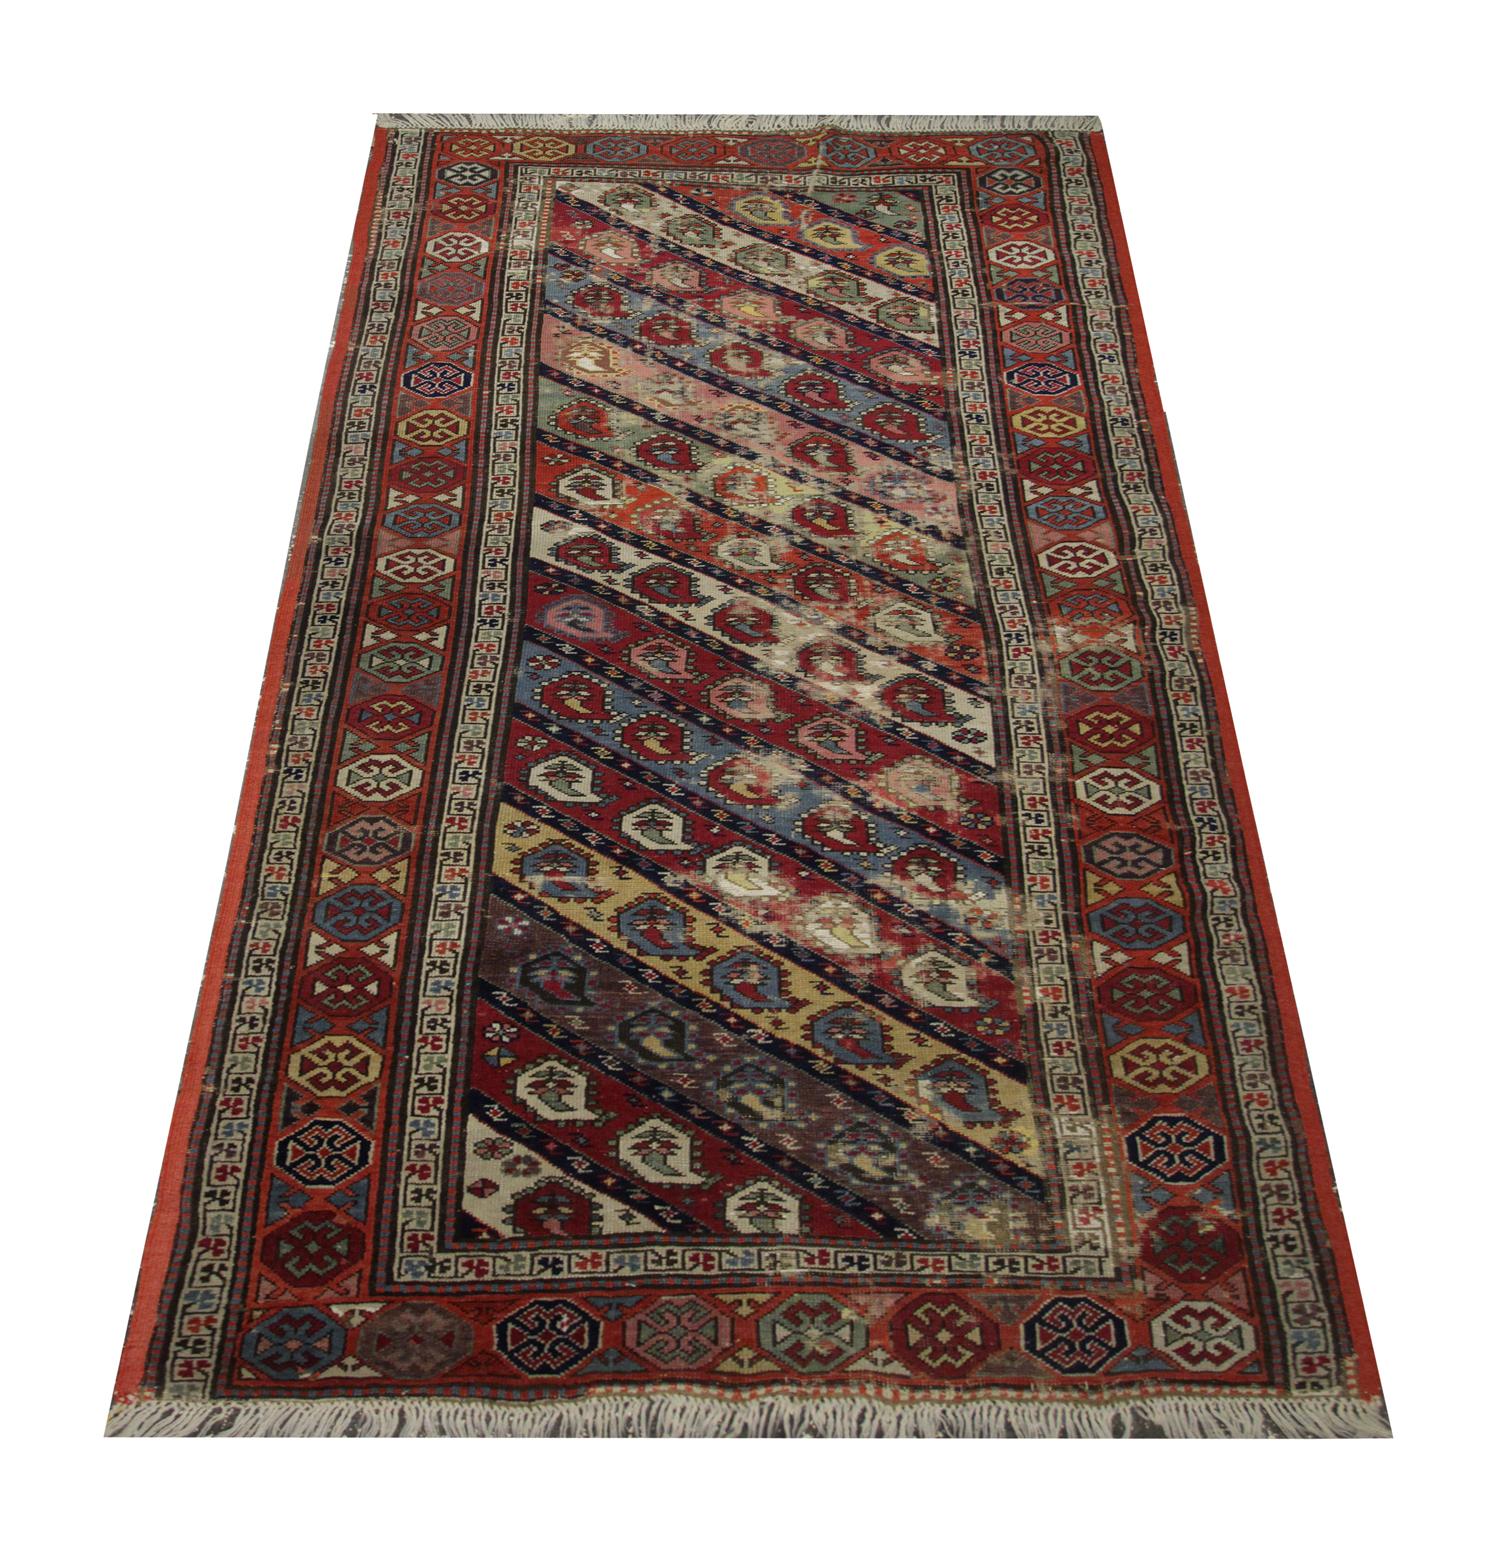 This elegantly handwoven wool rug is an excellent example of Caucasian rugs from the 1880s. Paisley motifs decorate the central design of this rug, delicately woven in a diagonal pattern with bold colours including red, blue, green and pink. A